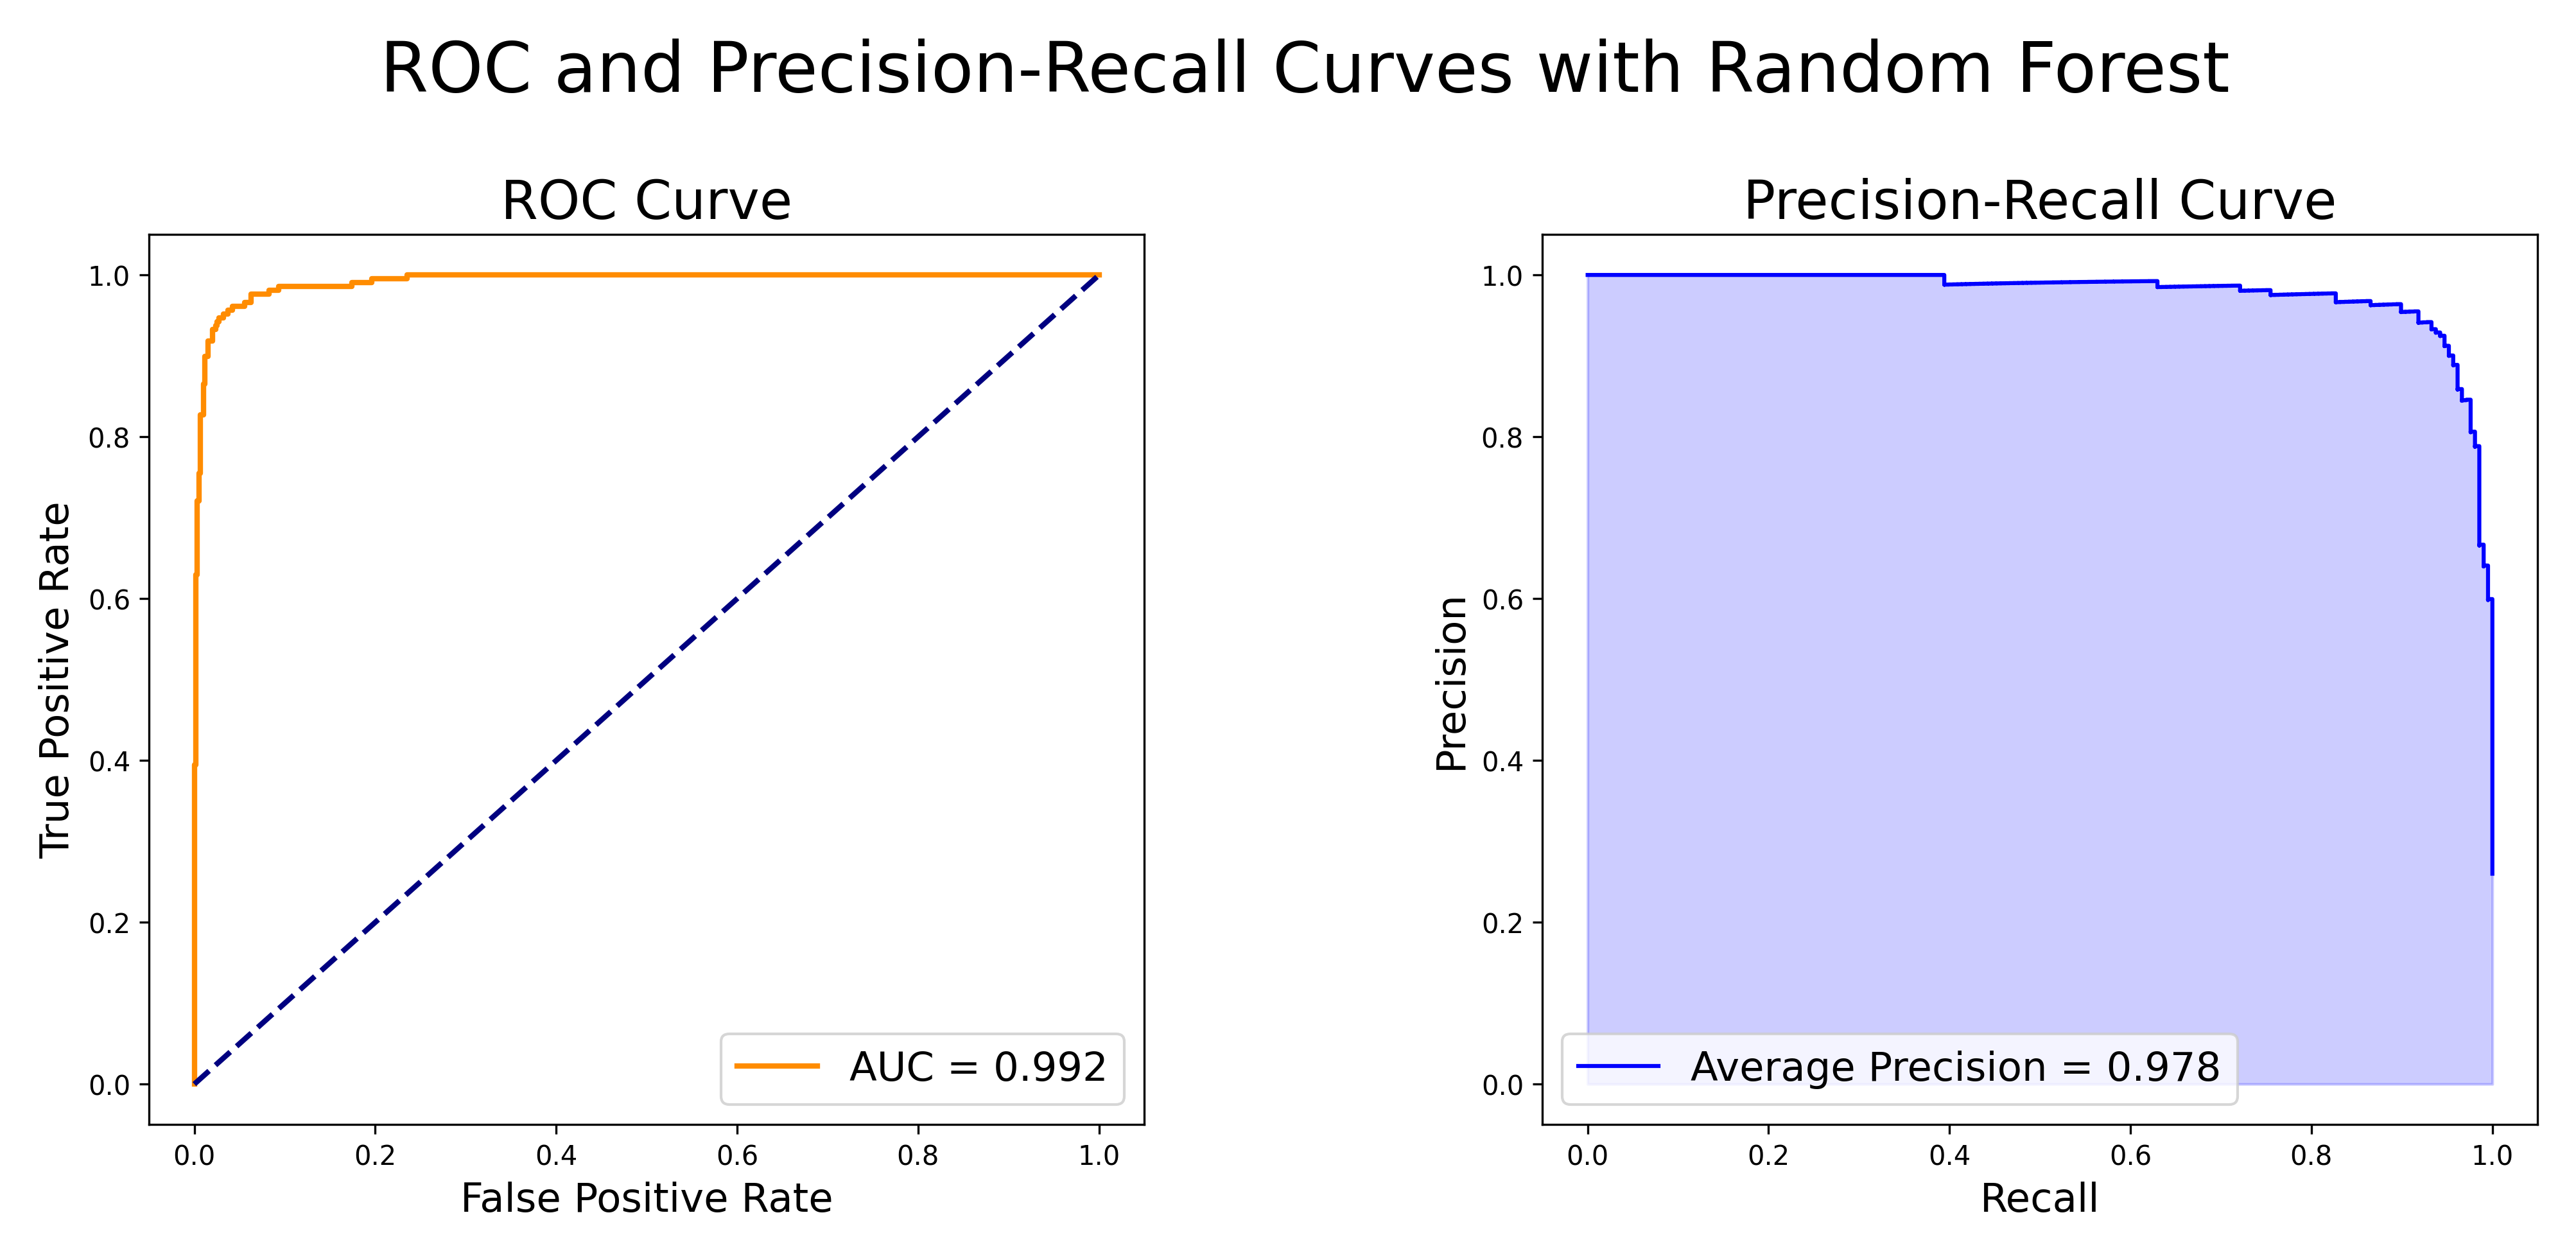 ROC and Precision-Recall Curves for Random Forest